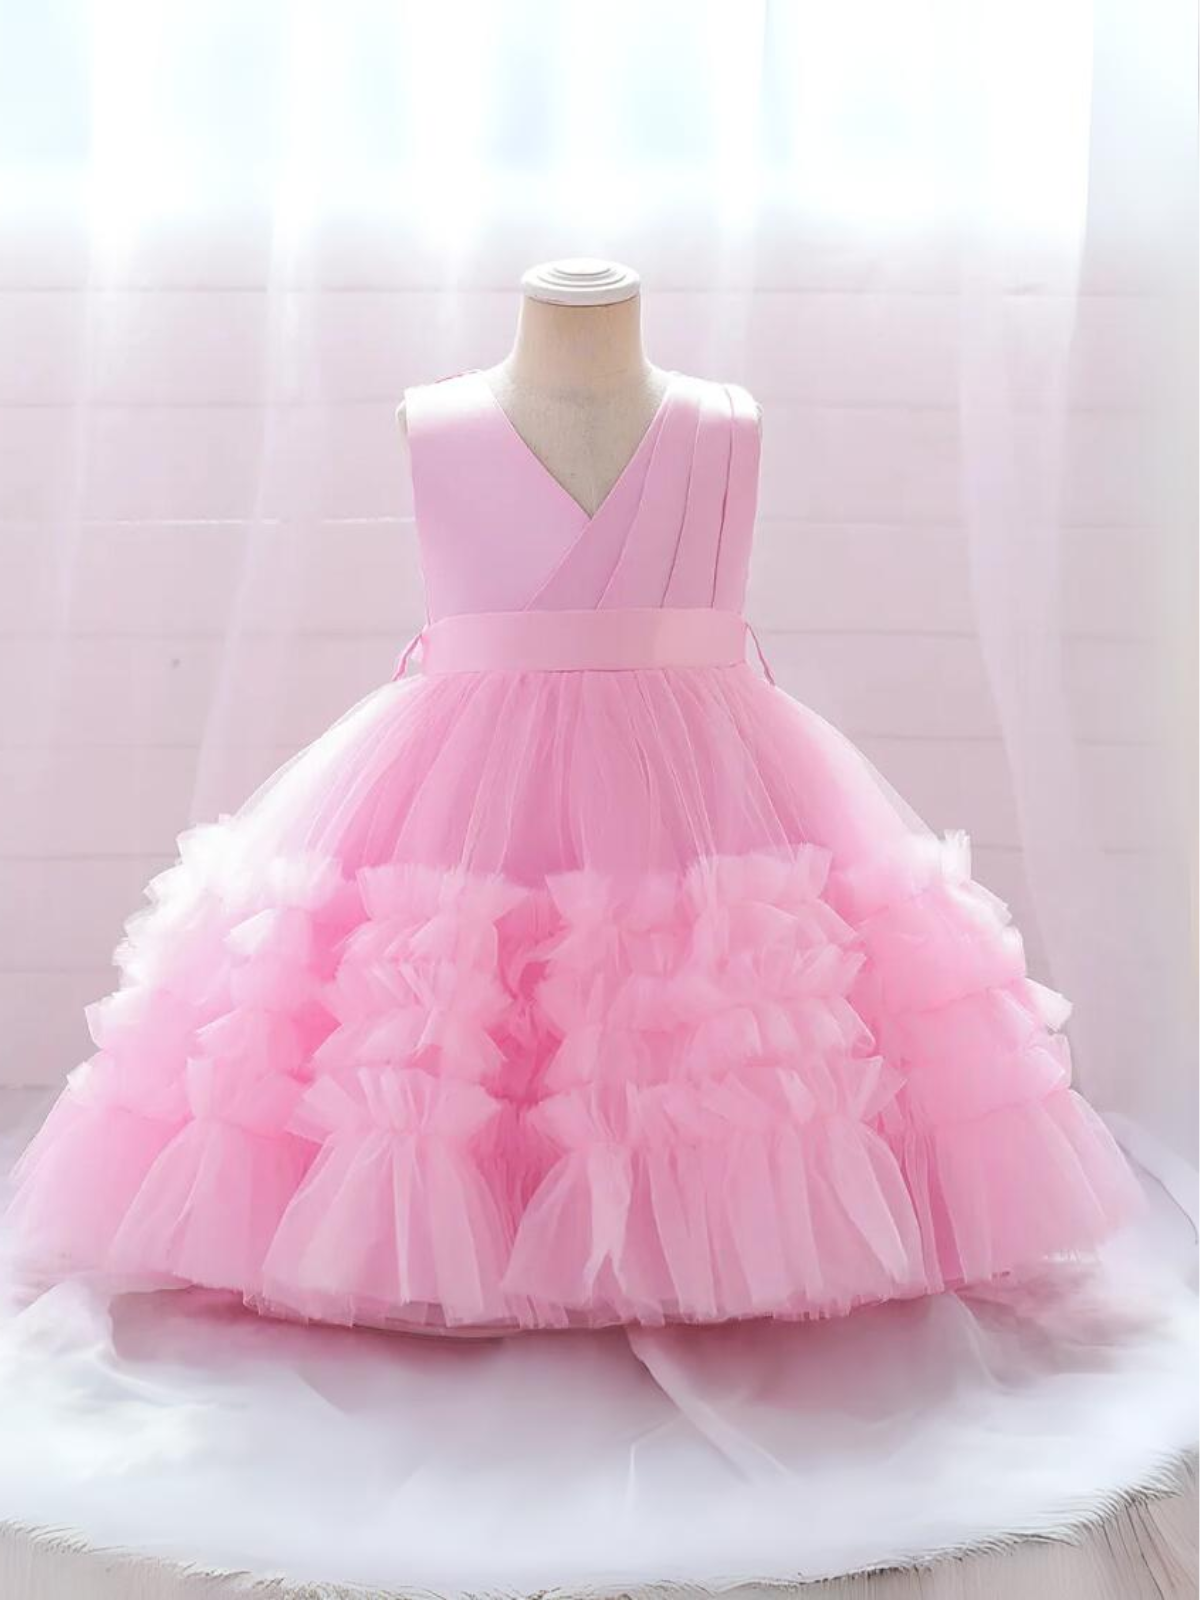 Mia Belle Girls Pink Ruffle Tulle Gown | Girls Spring Formal Dresses